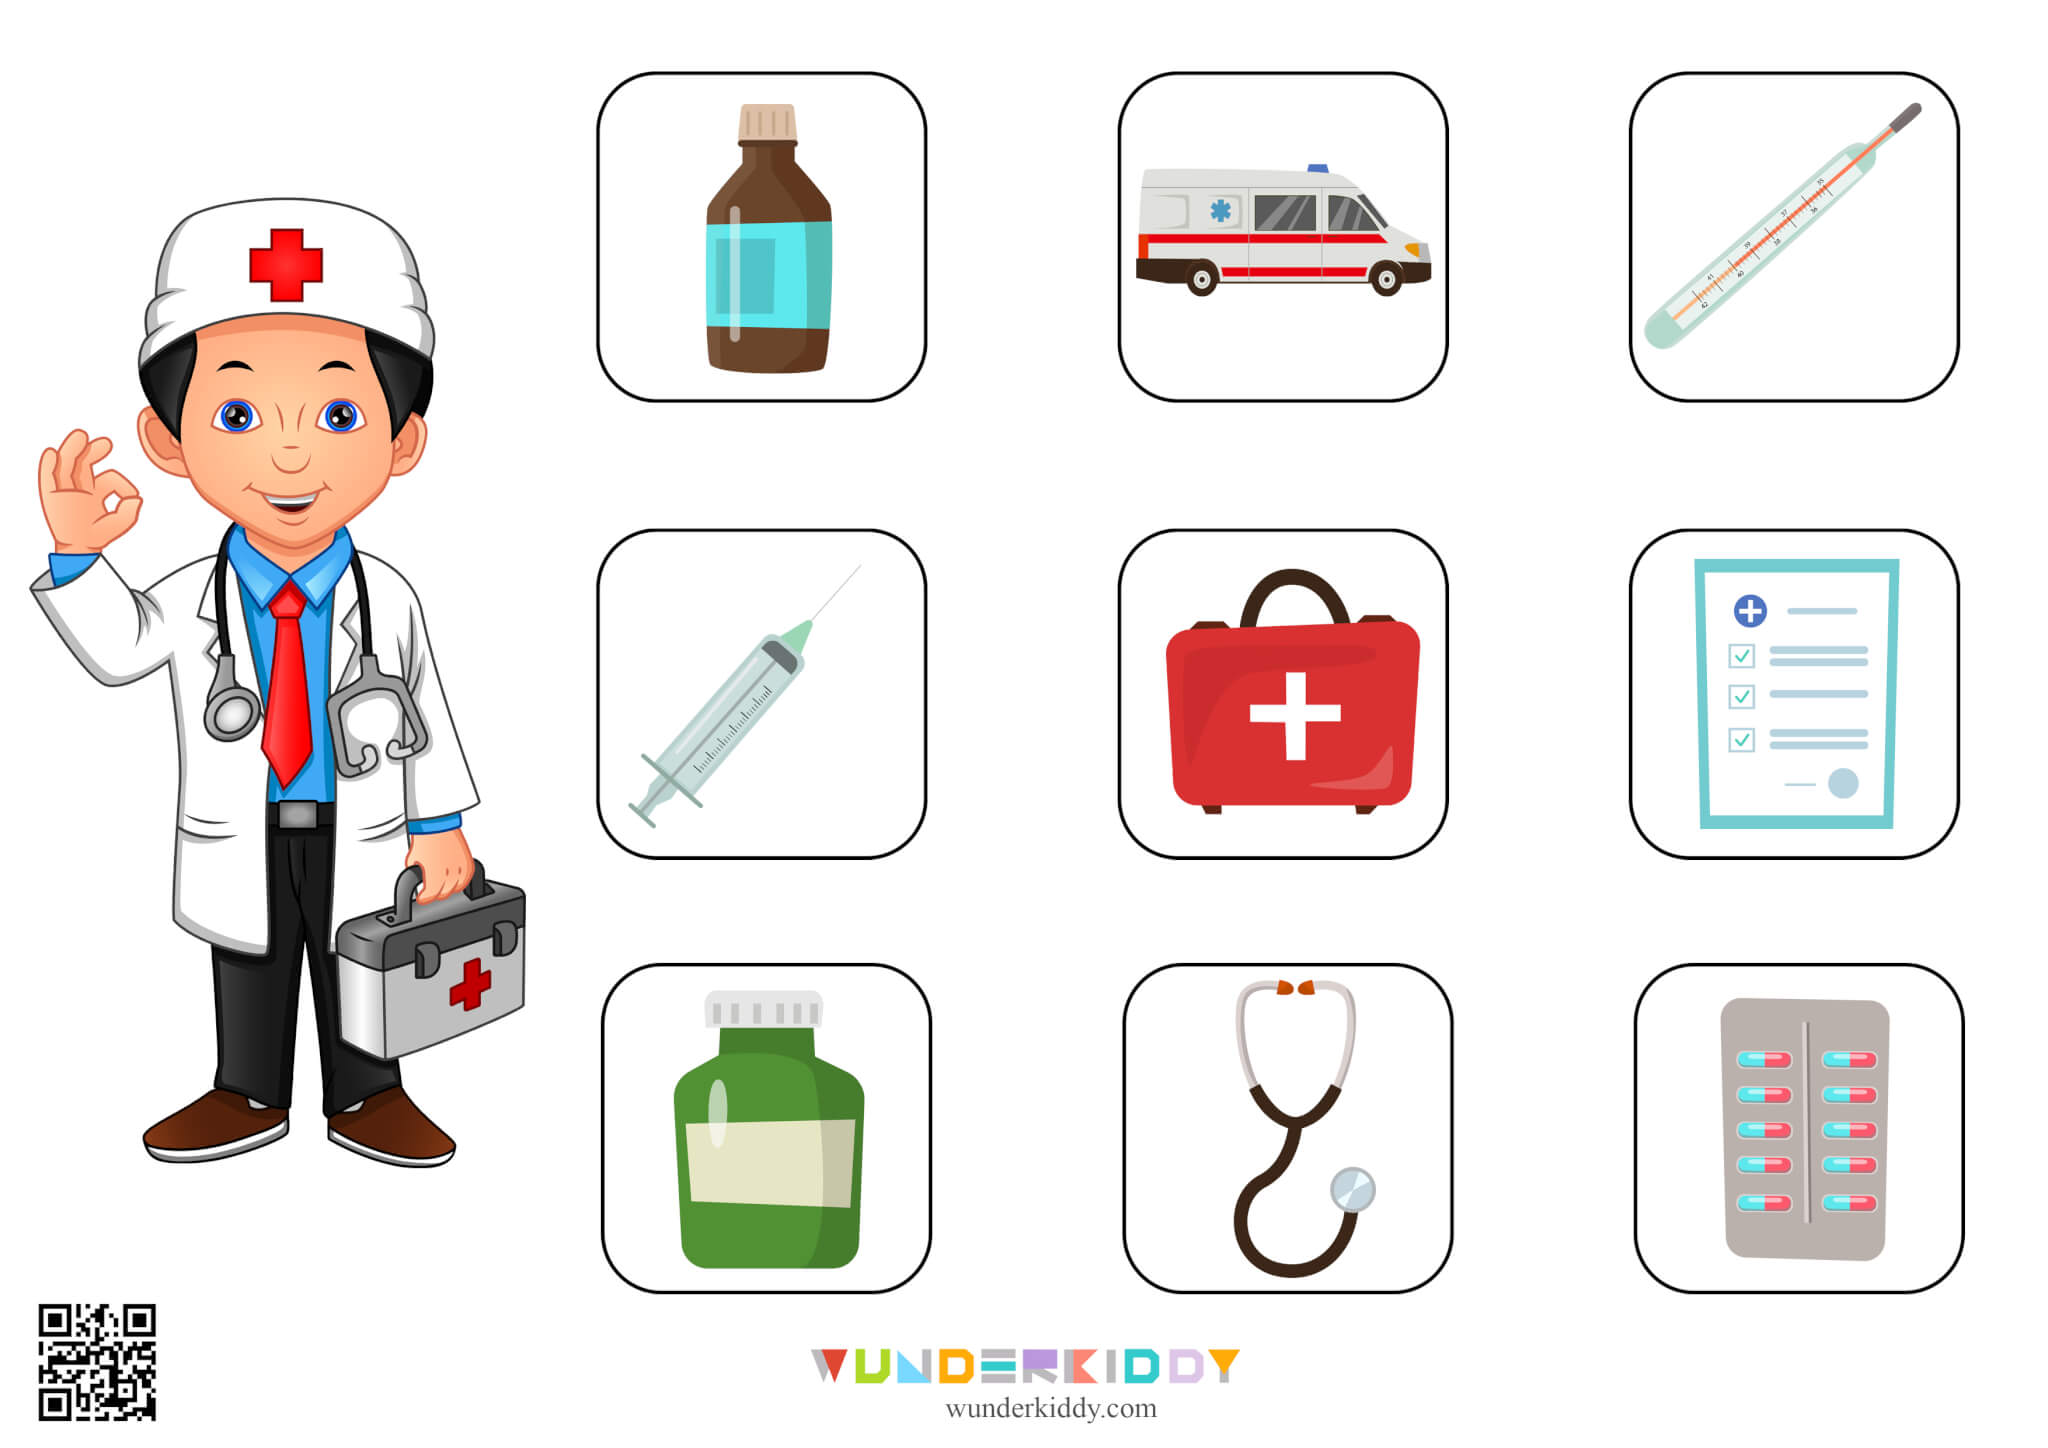 Sorting Worksheet Professions and Tools - Image 12